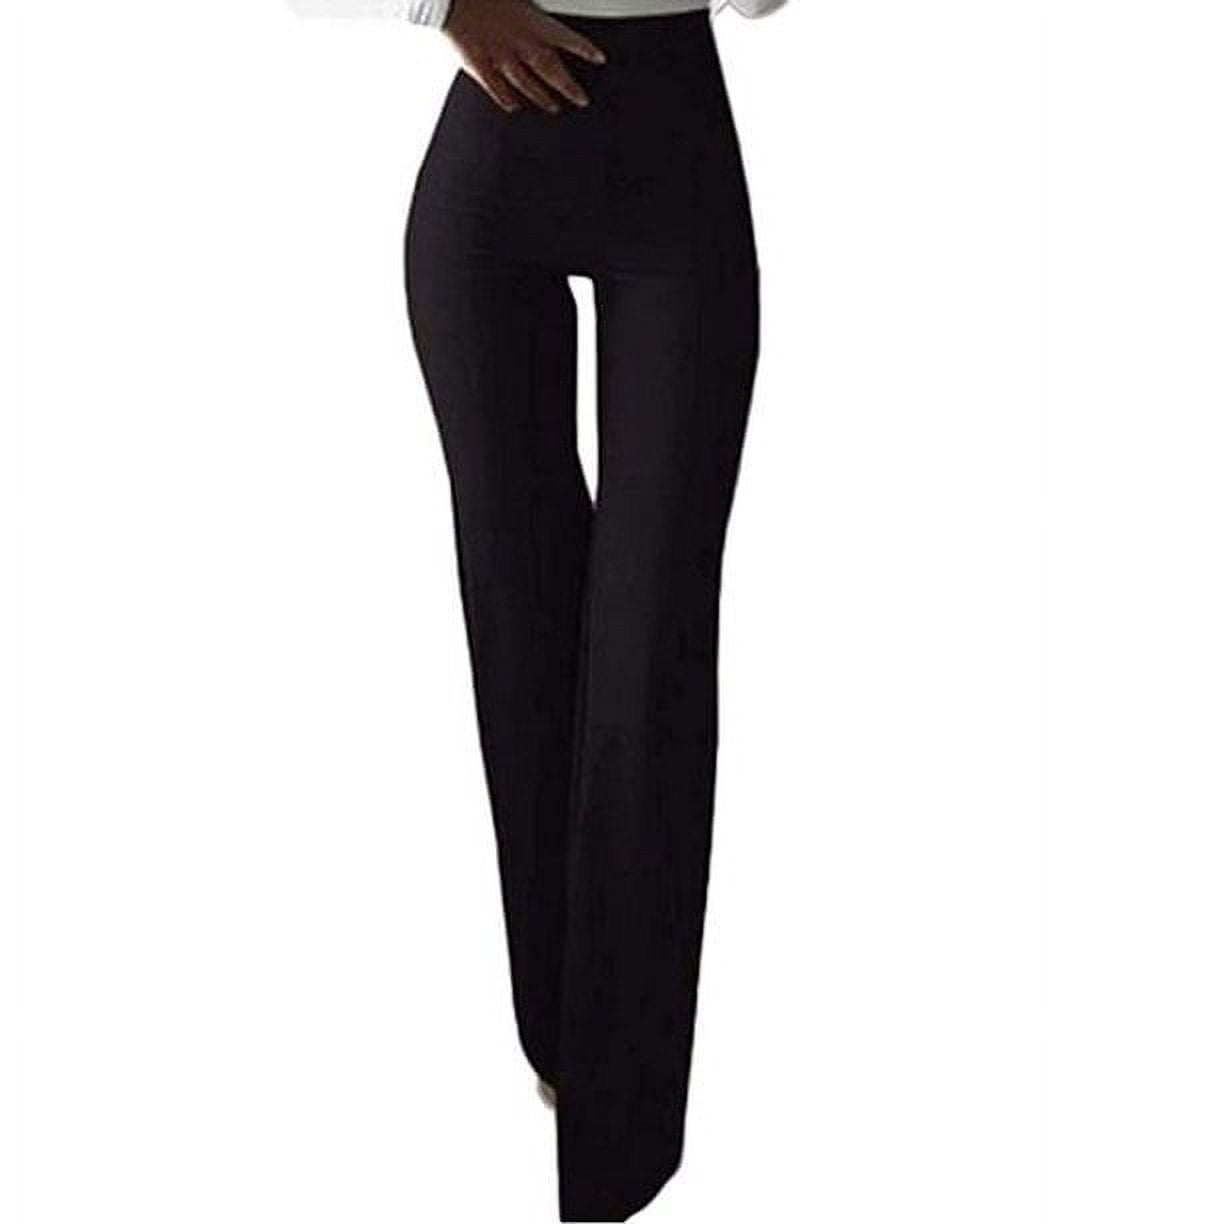 Missakso Y2K Hollow Out Flare Pants Black/White High Waist Stretchy Skinny Flared  Trousers Women For Women, Perfect For Summer Streetwear Parties 210625 From  Dou02, $13.35